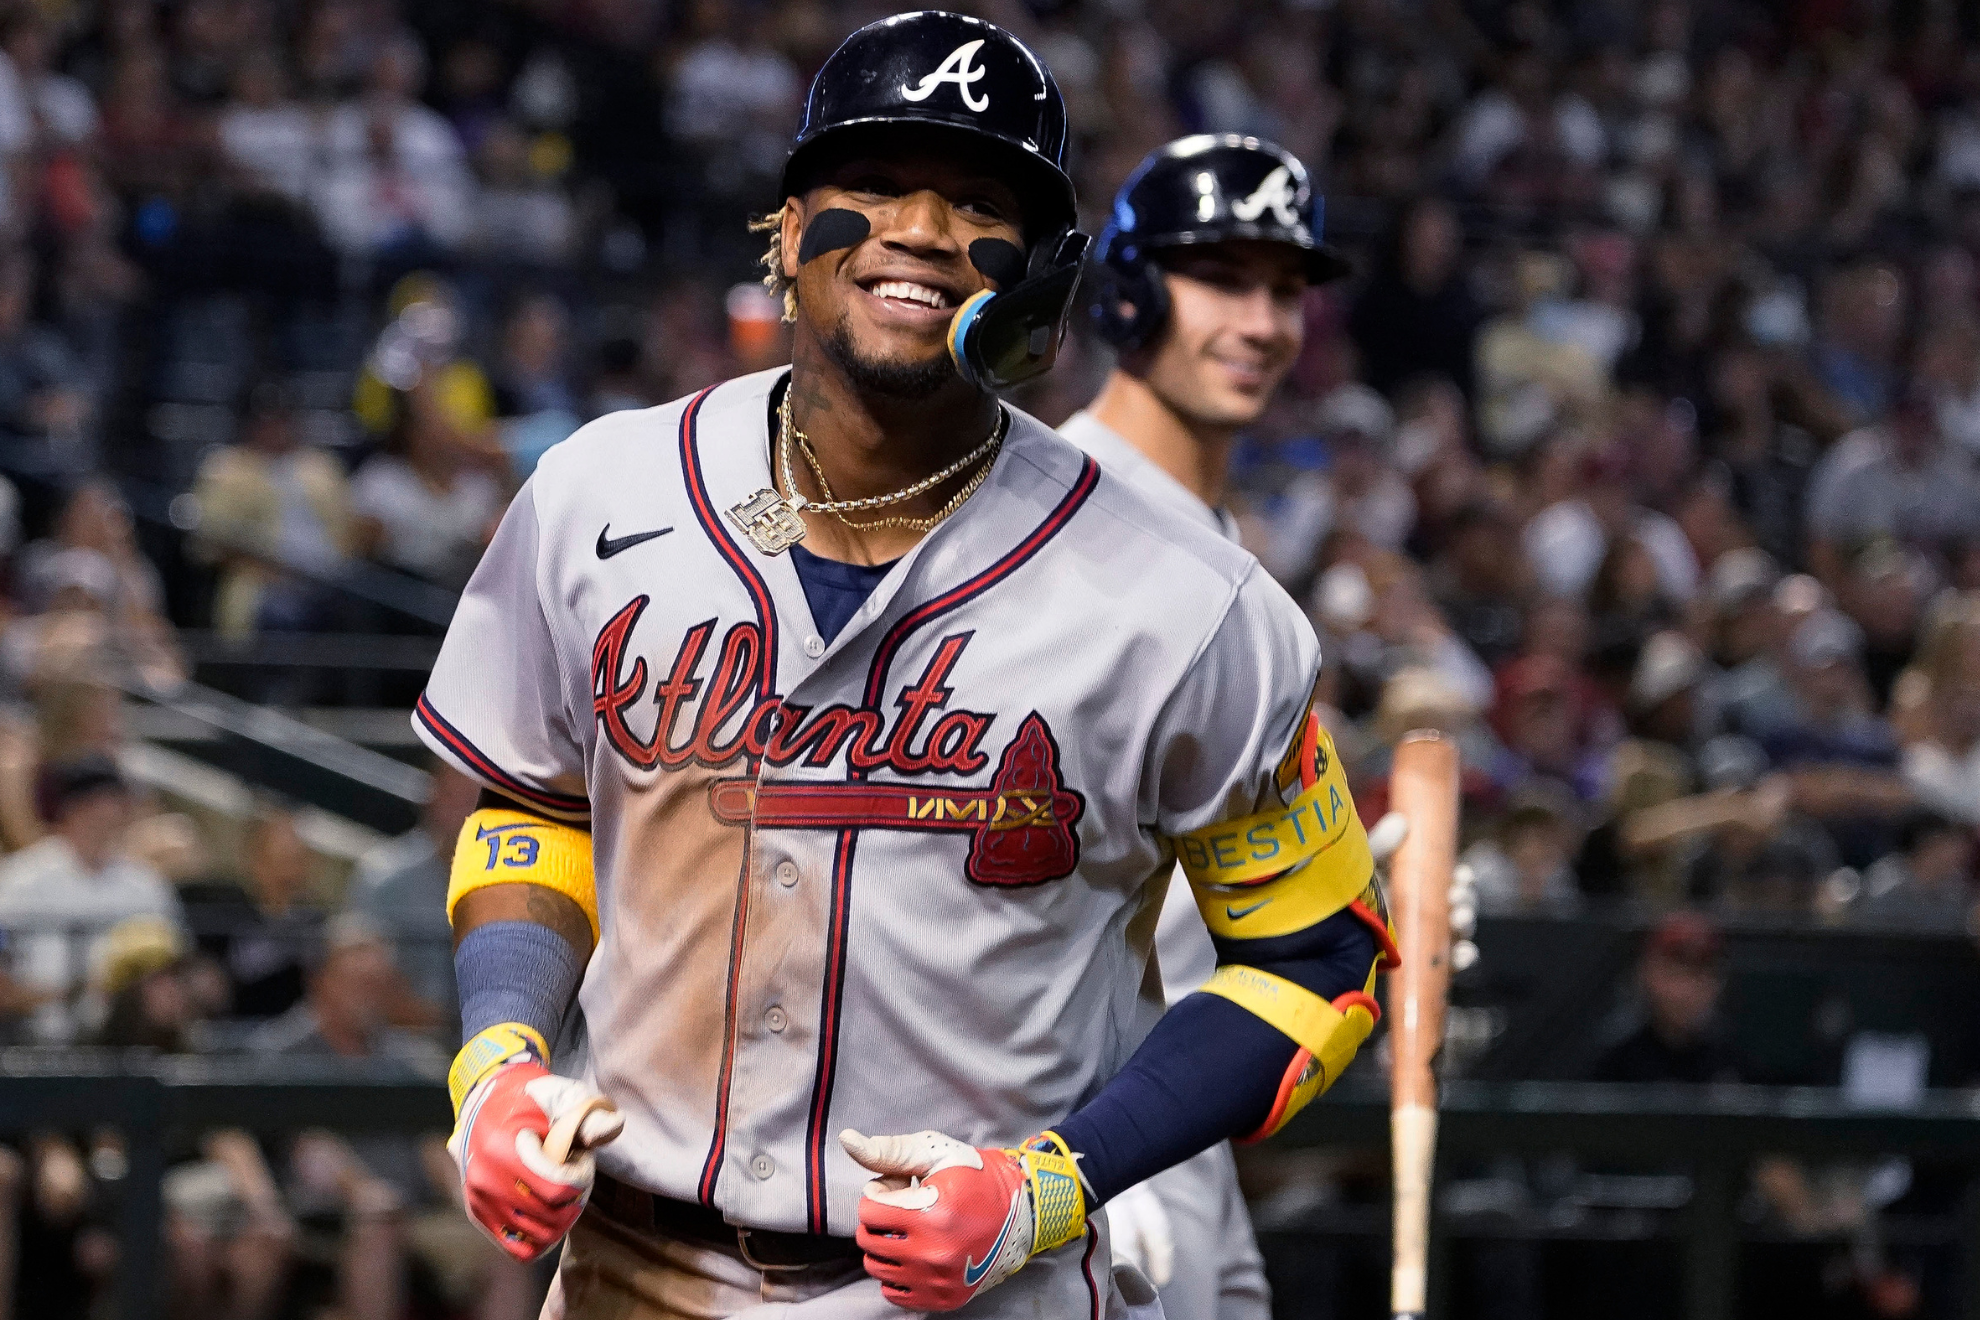 Forty-one home runs and 73 stolen bases later, Acuña is an MVP.